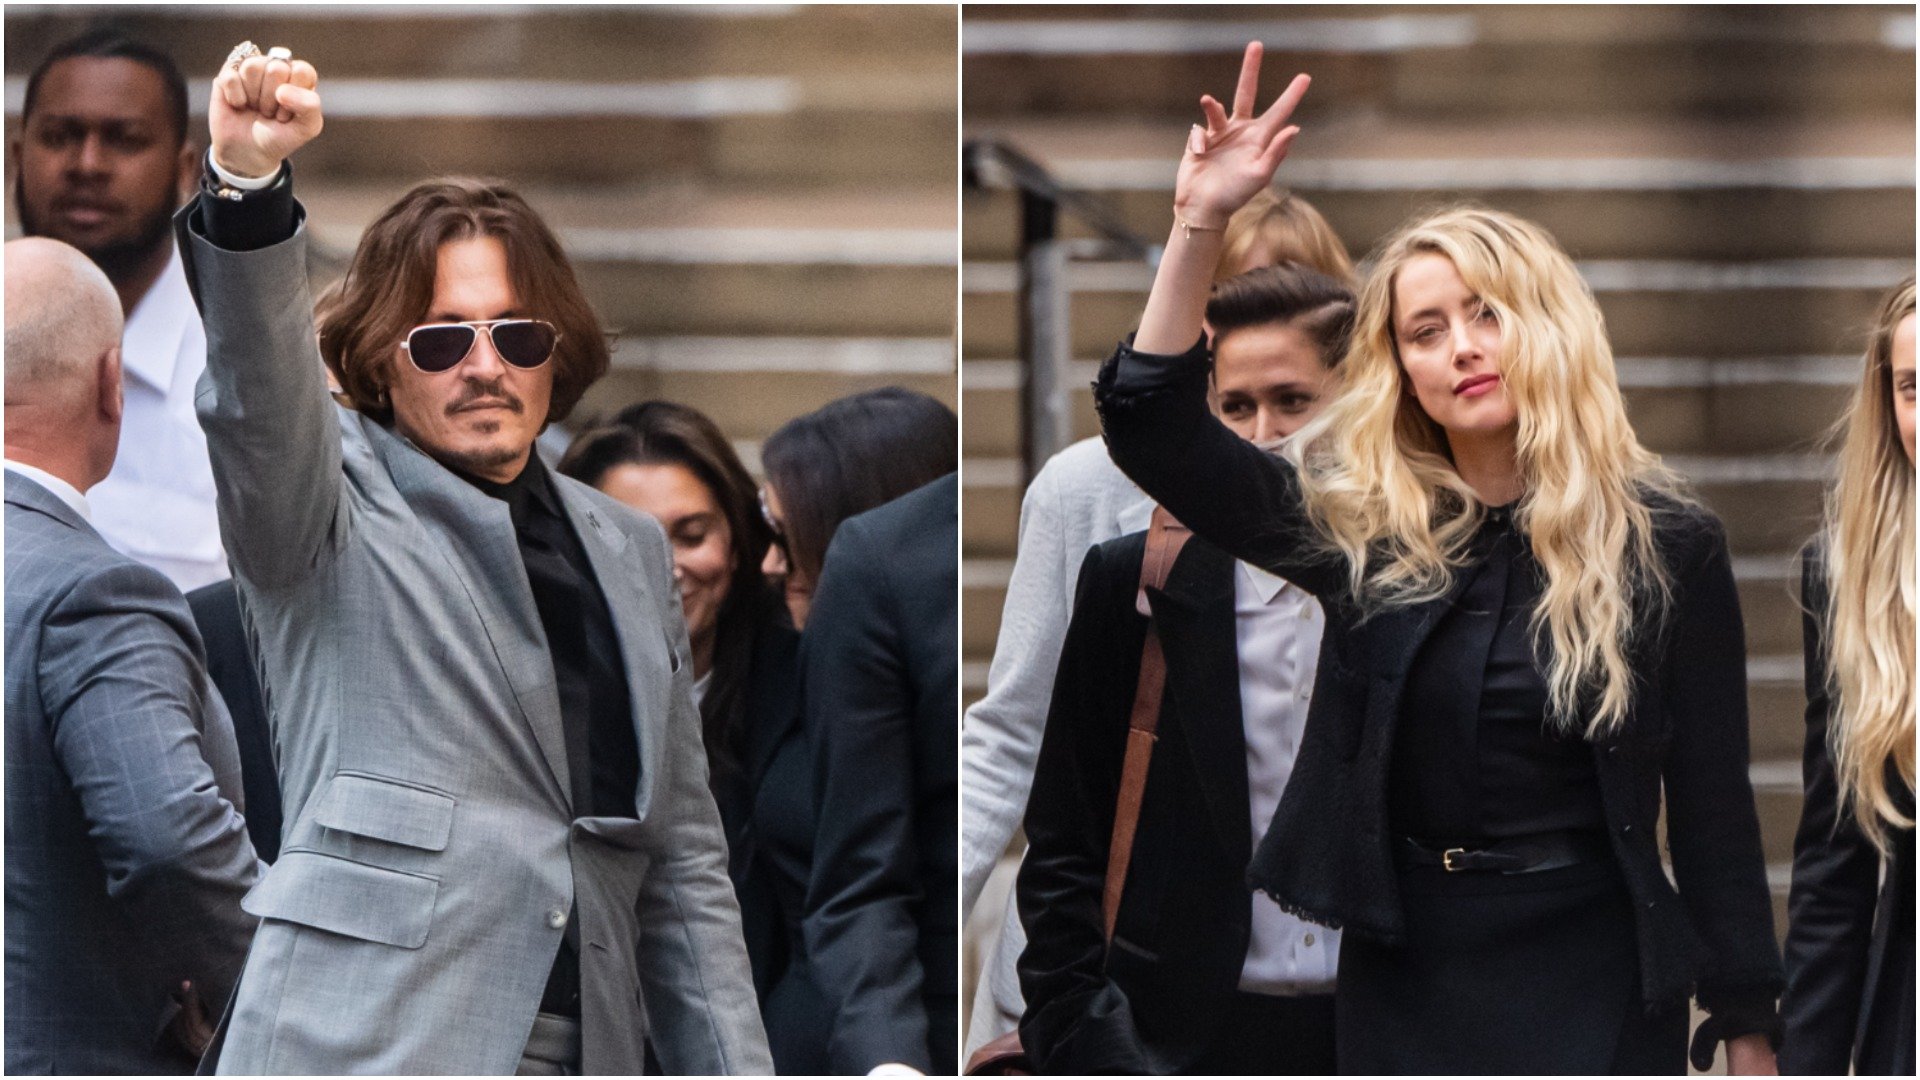 In July 2020 Johnny Depp and Amber Heard leave court at different times. Depp flashed a fist to the crowd and Heard made a peace sign. 